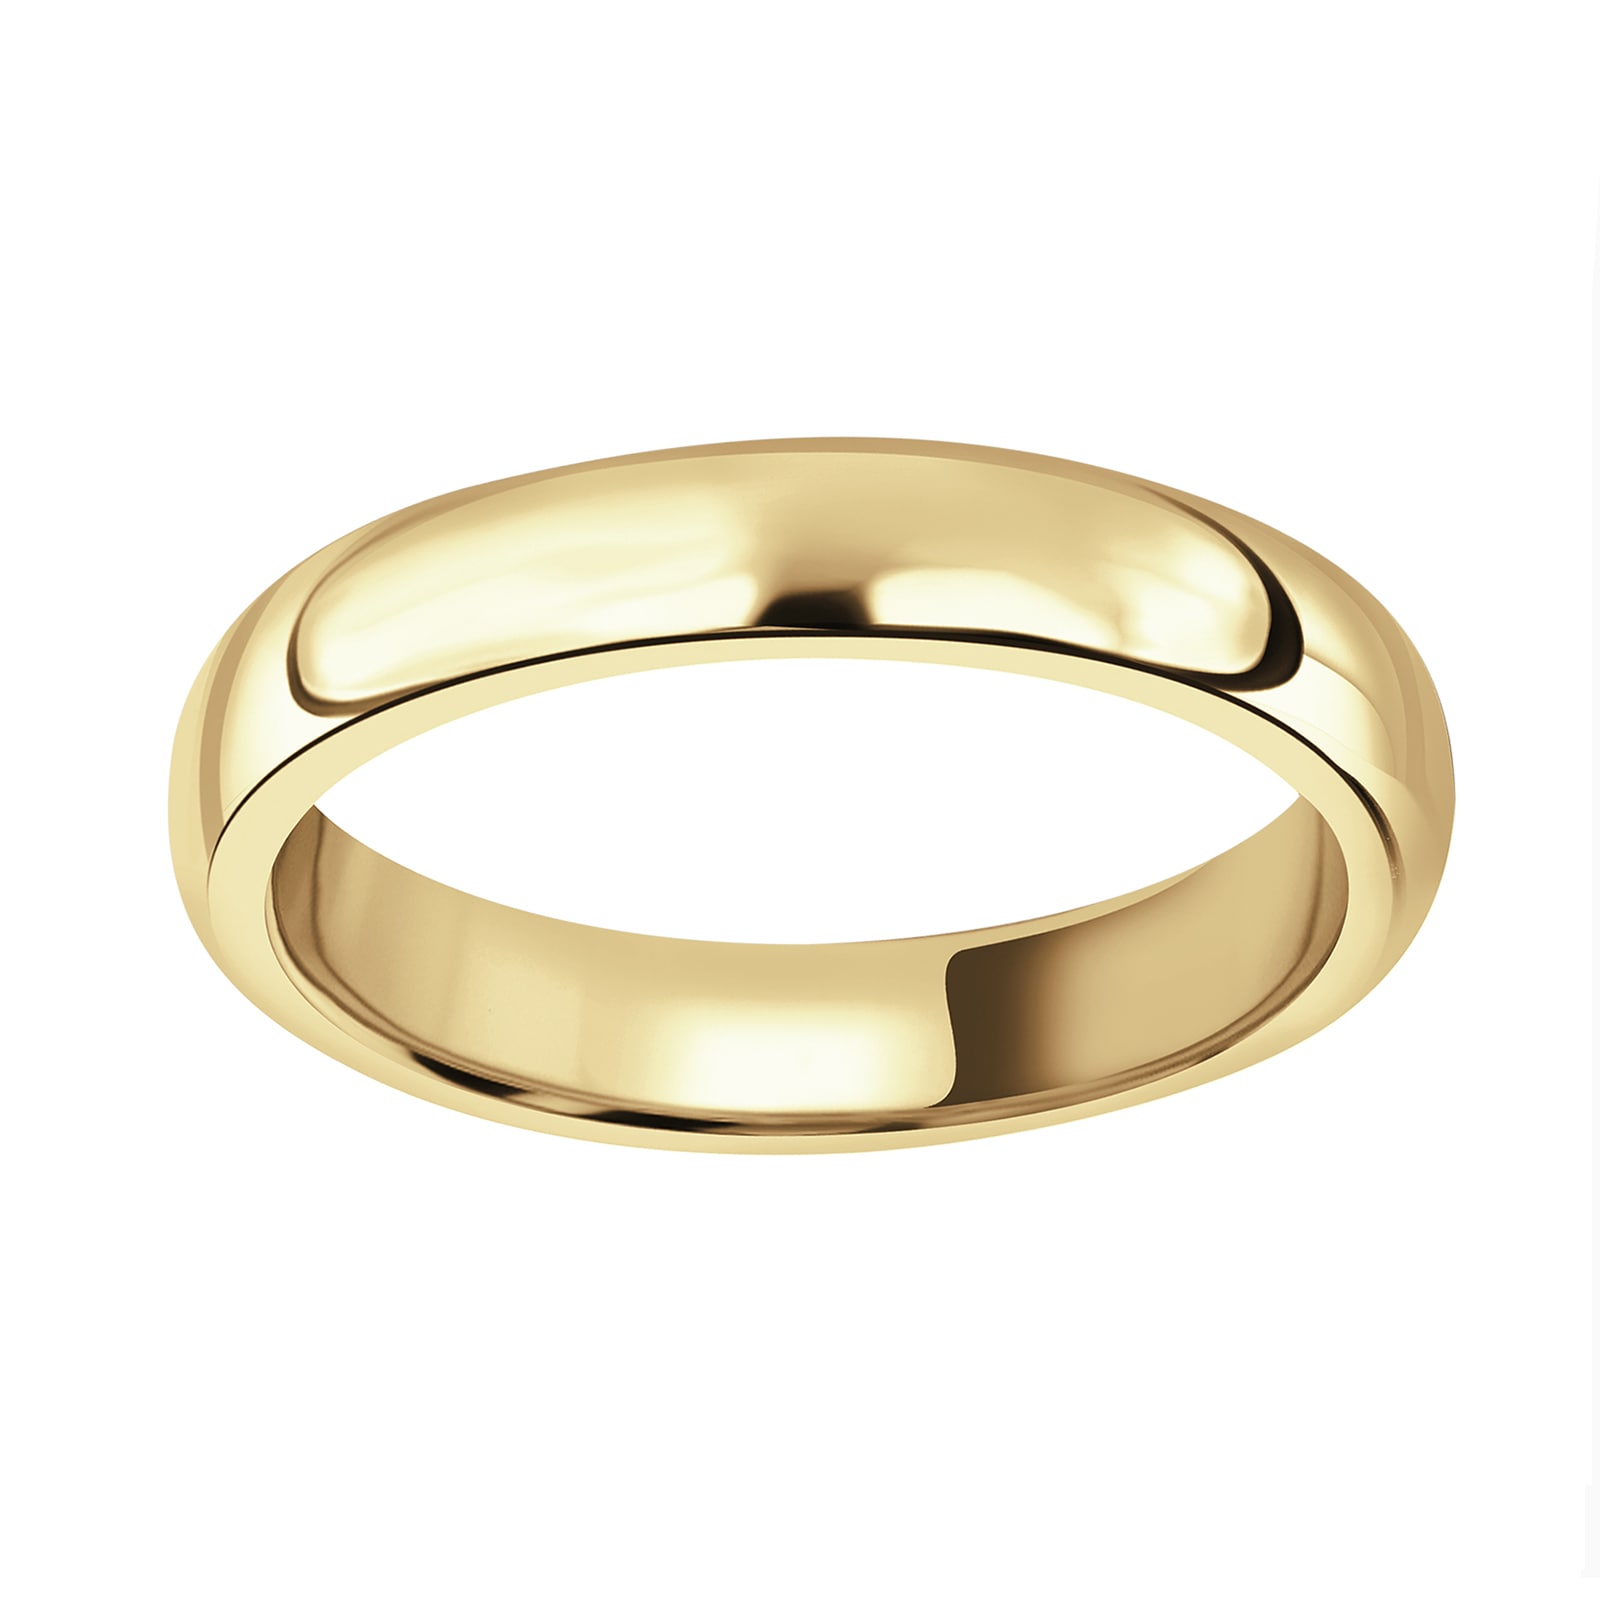 Buy Silver & Gold-Toned Rings for Women by Vshine Fashion Jewellery Online  | Ajio.com